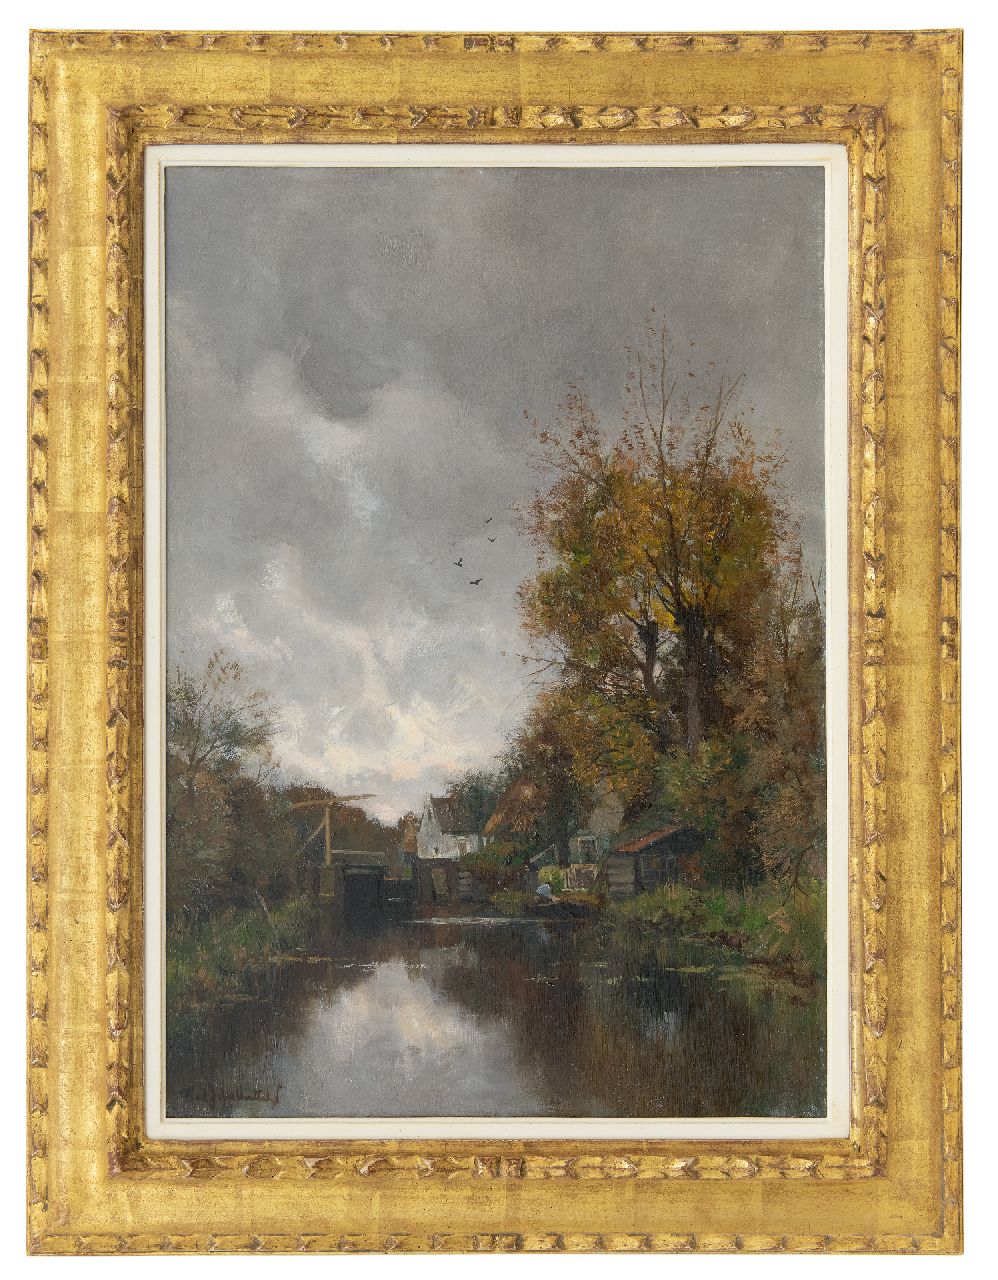 Rossum du Chattel F.J. van | Fredericus Jacobus van Rossum du Chattel | Paintings offered for sale | A small stream with a drawbridge, oil on canvas 56.5 x 40.3 cm, signed l.l.